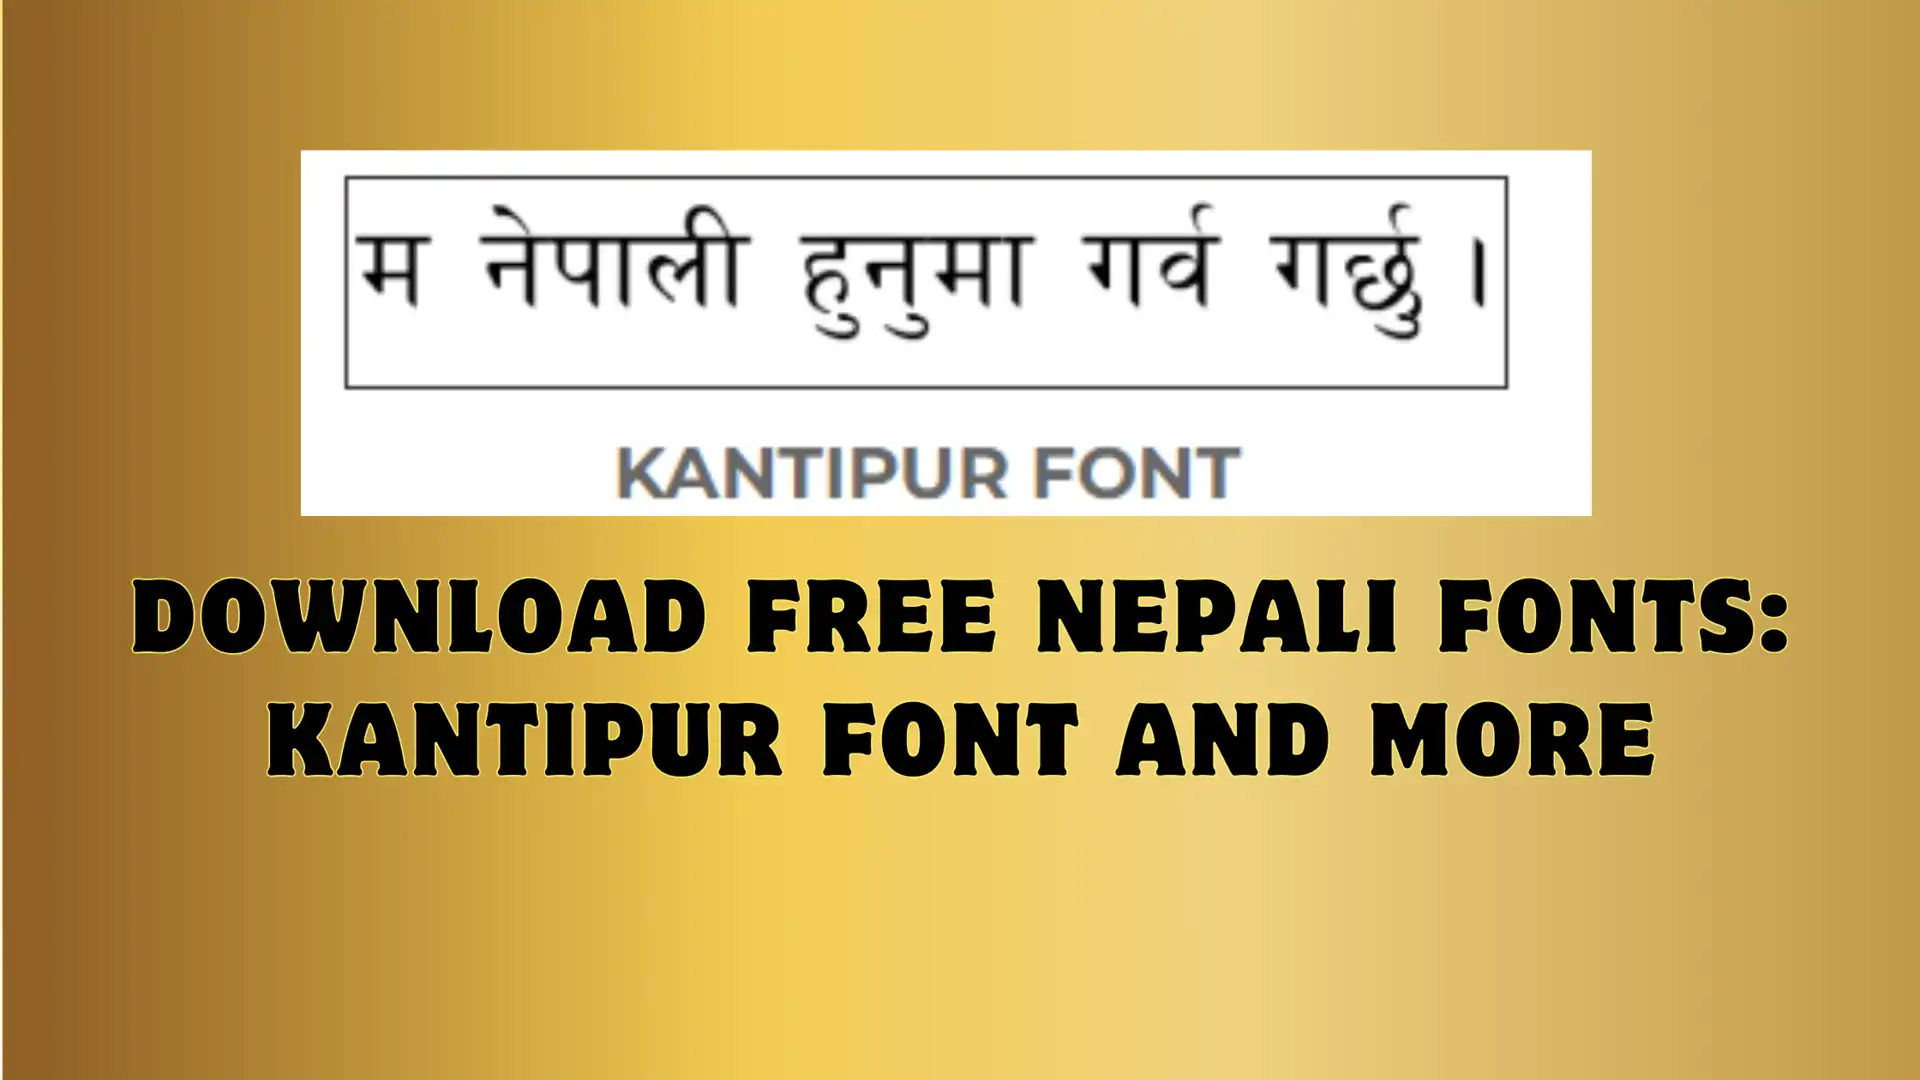 Download Free Nepali Fonts Kantipur Font and More